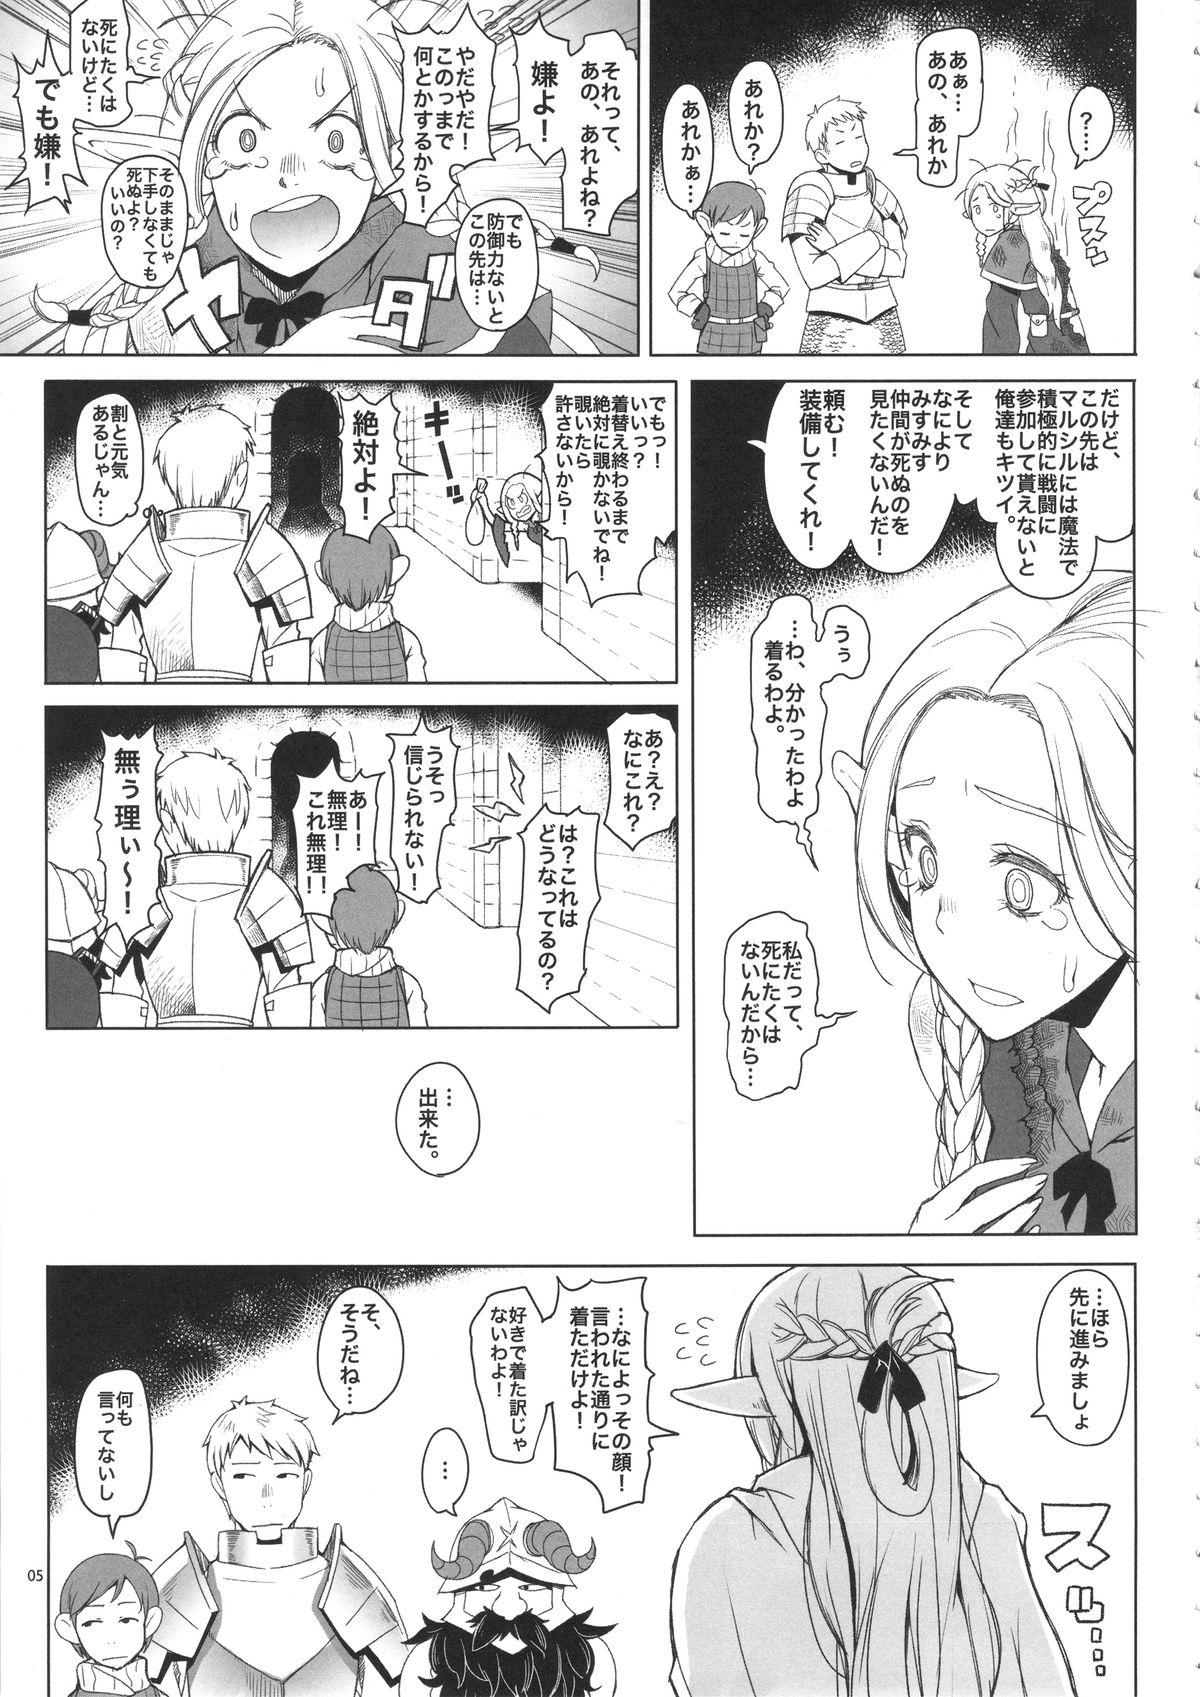 Pool Marcille Meshi - Dungeon meshi Tease - Page 4